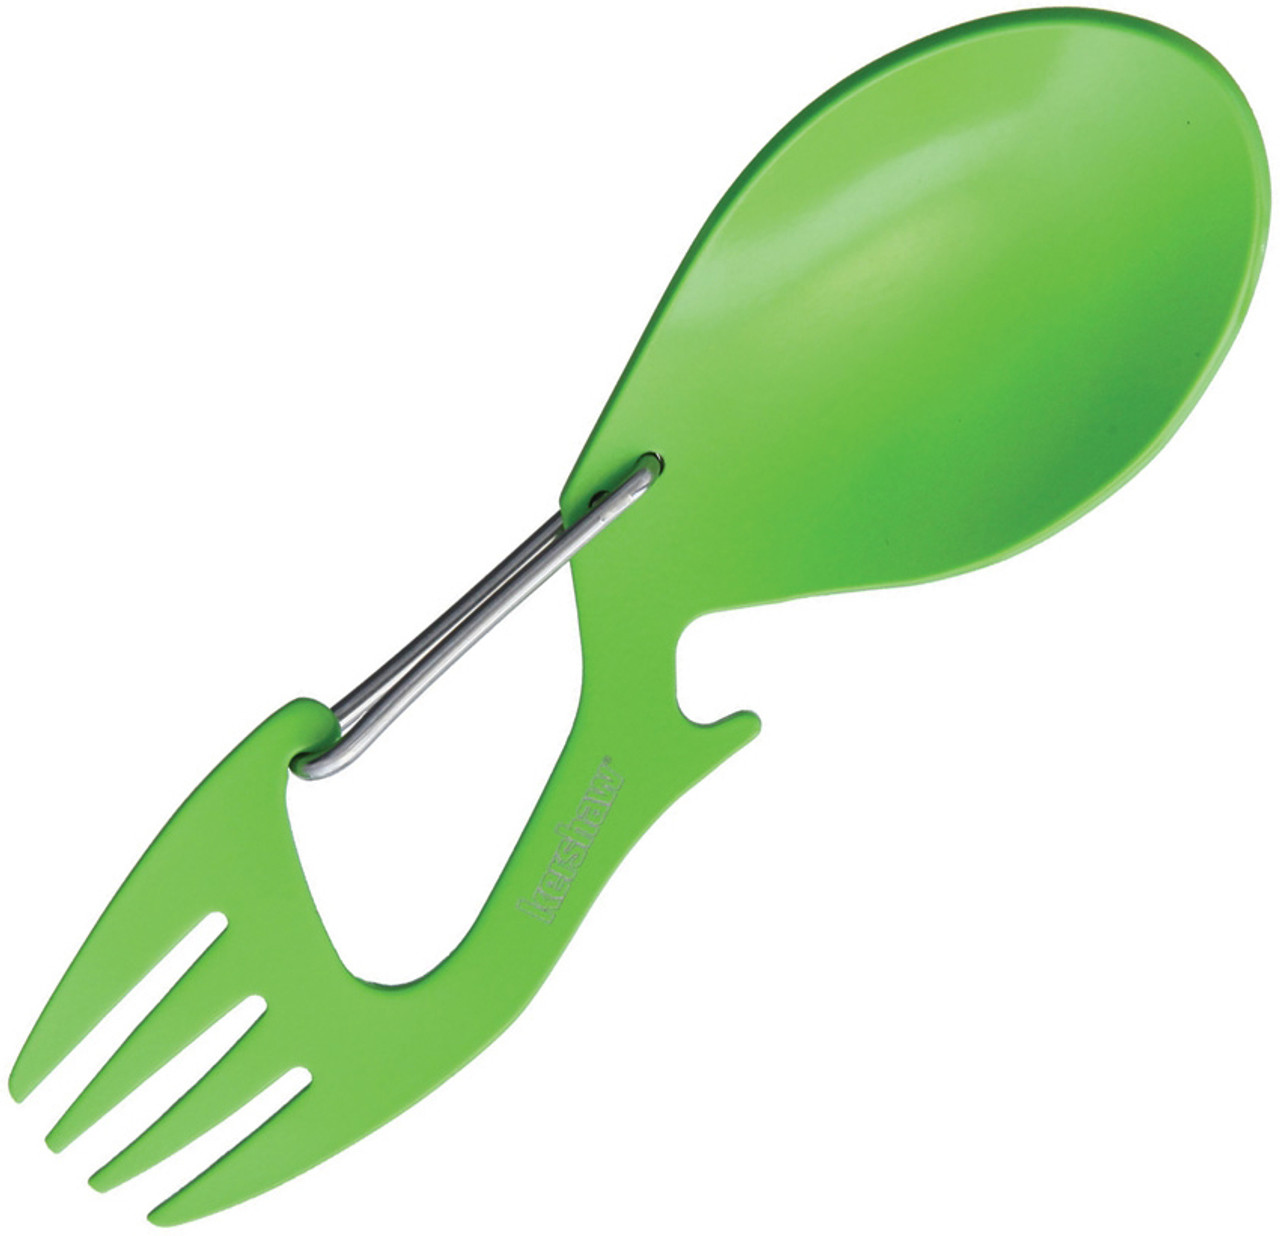 Kershaw 1140 Ration Green , 4.6" 3Cr13MoV SS Spoon and Fork Combo Tool w/Carabiner